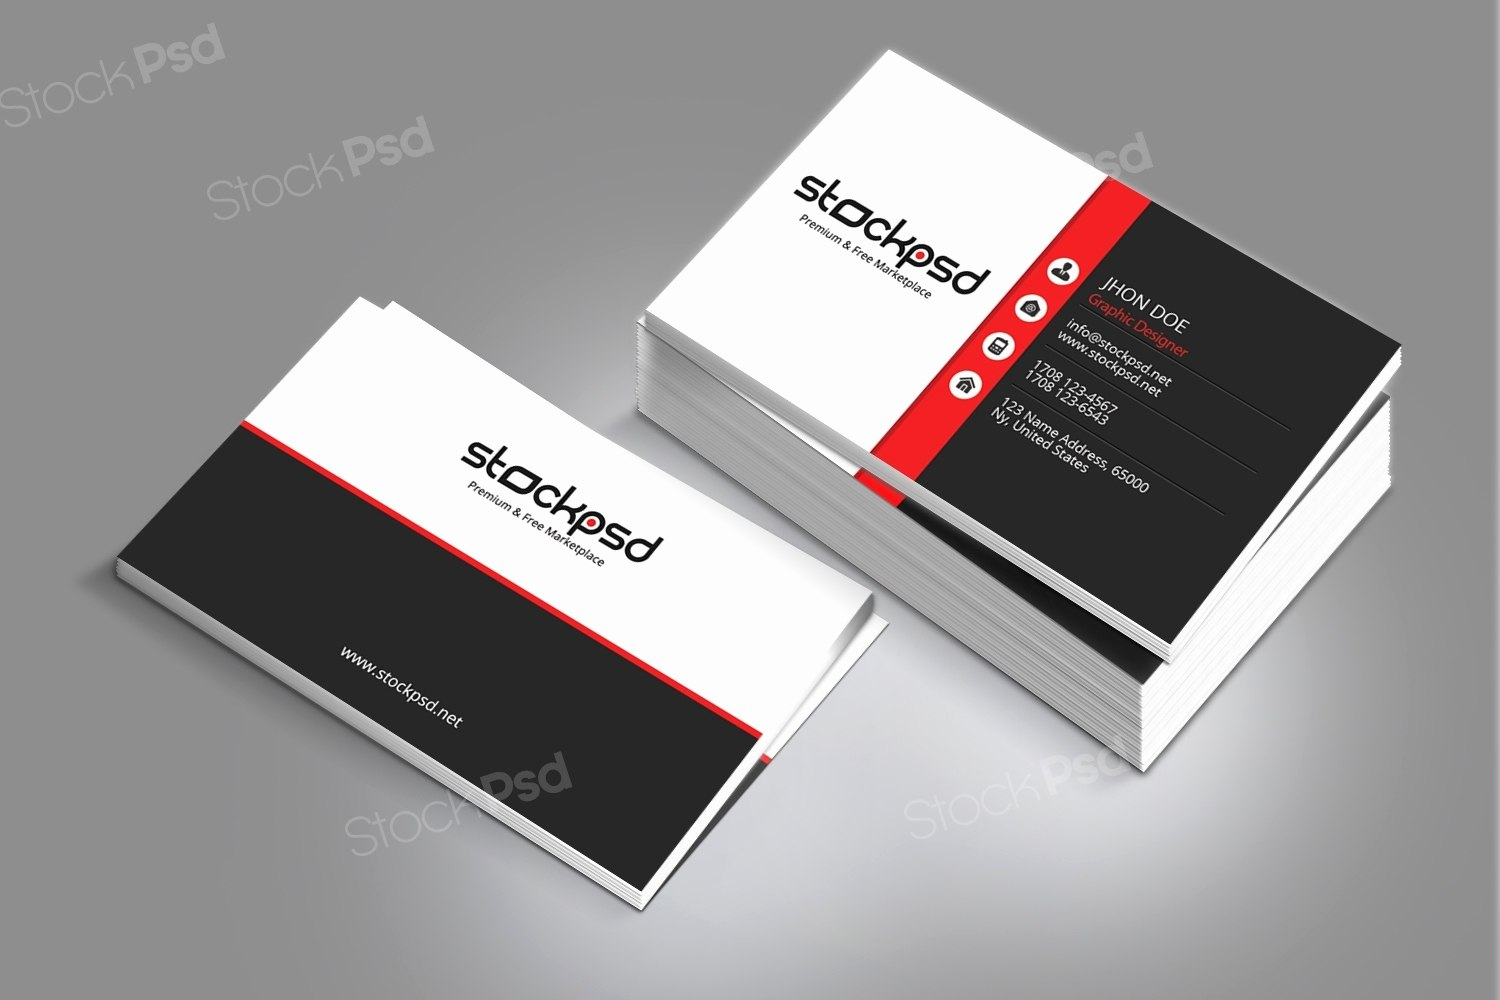 Staples Business Card Awesome Fresh Staples Business Cards Template within Staples Business Card Template